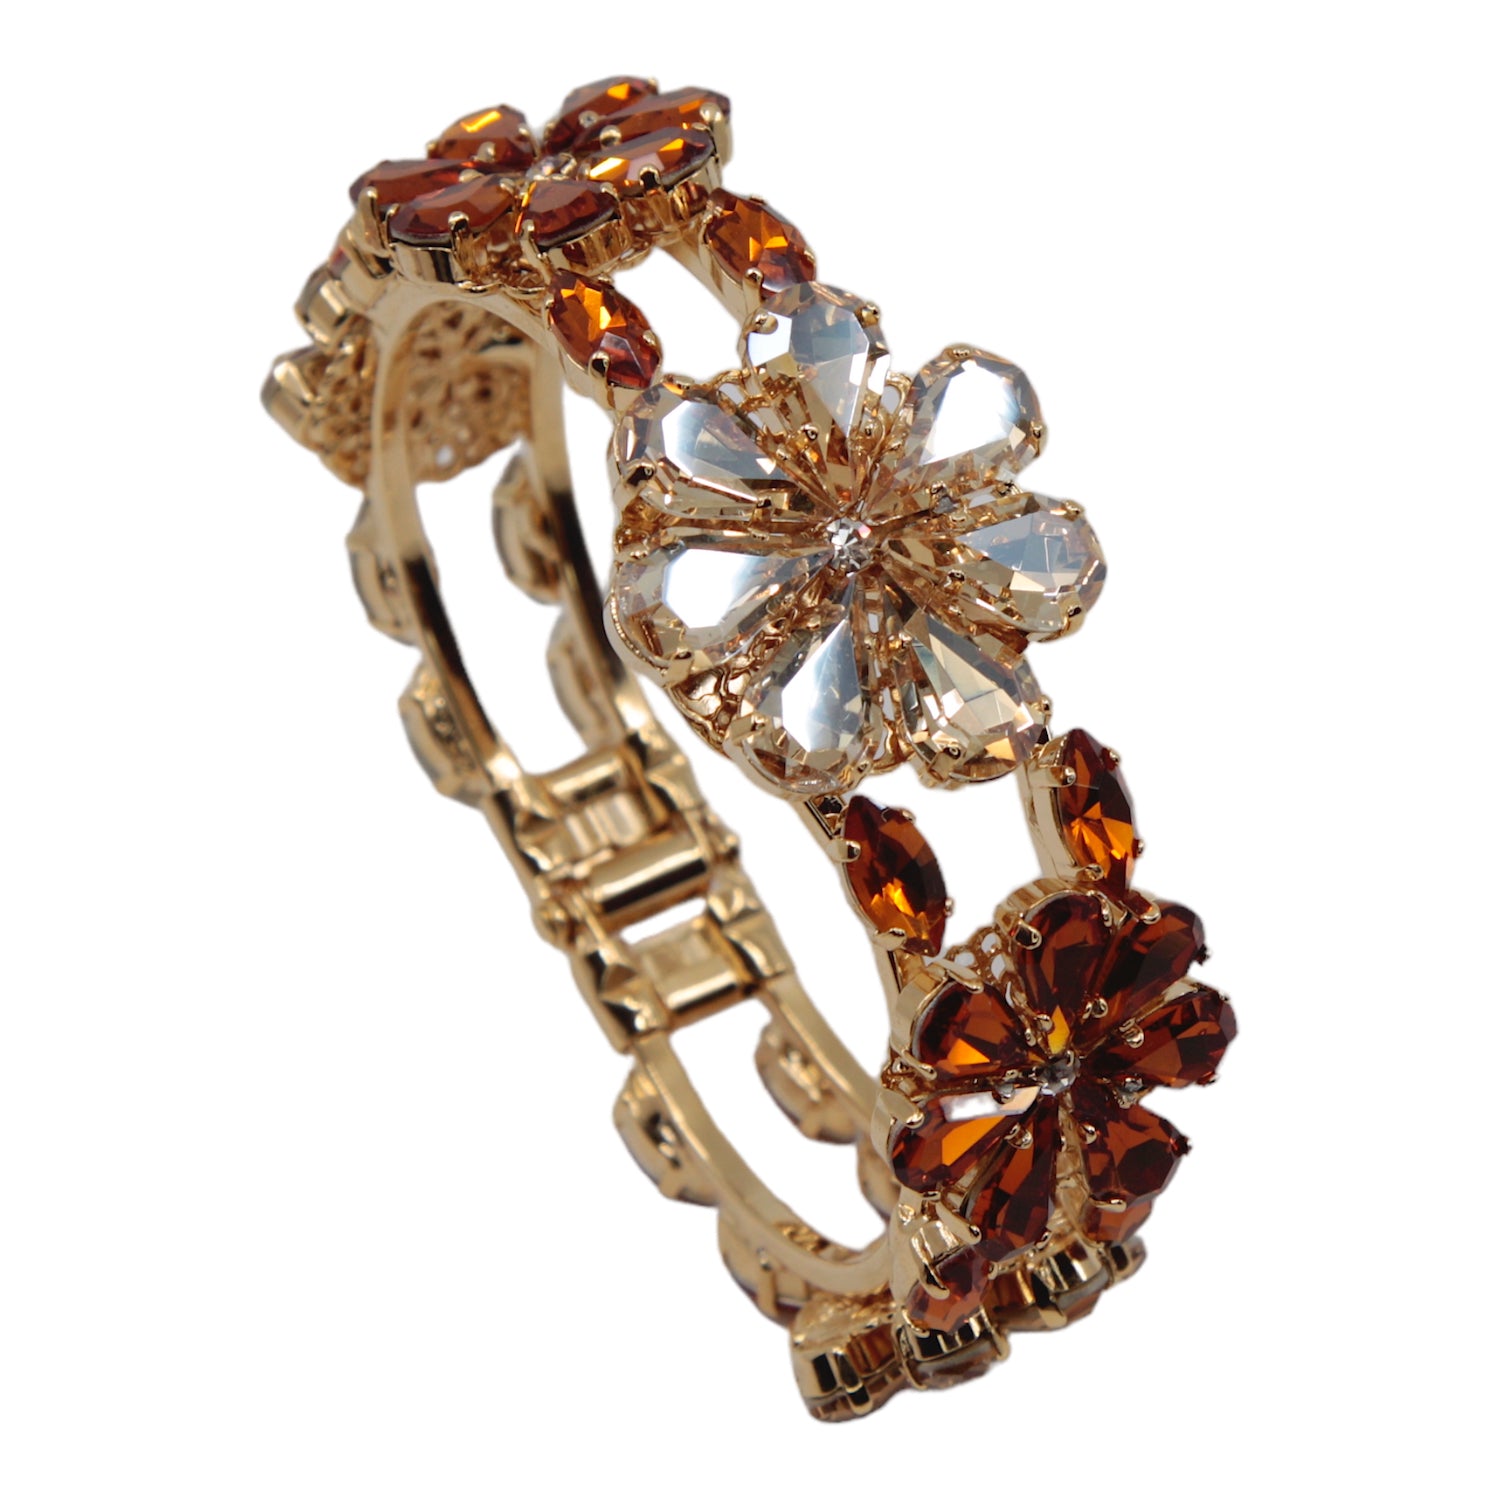 Daisy Bracelet In Amber And Topaz Shades